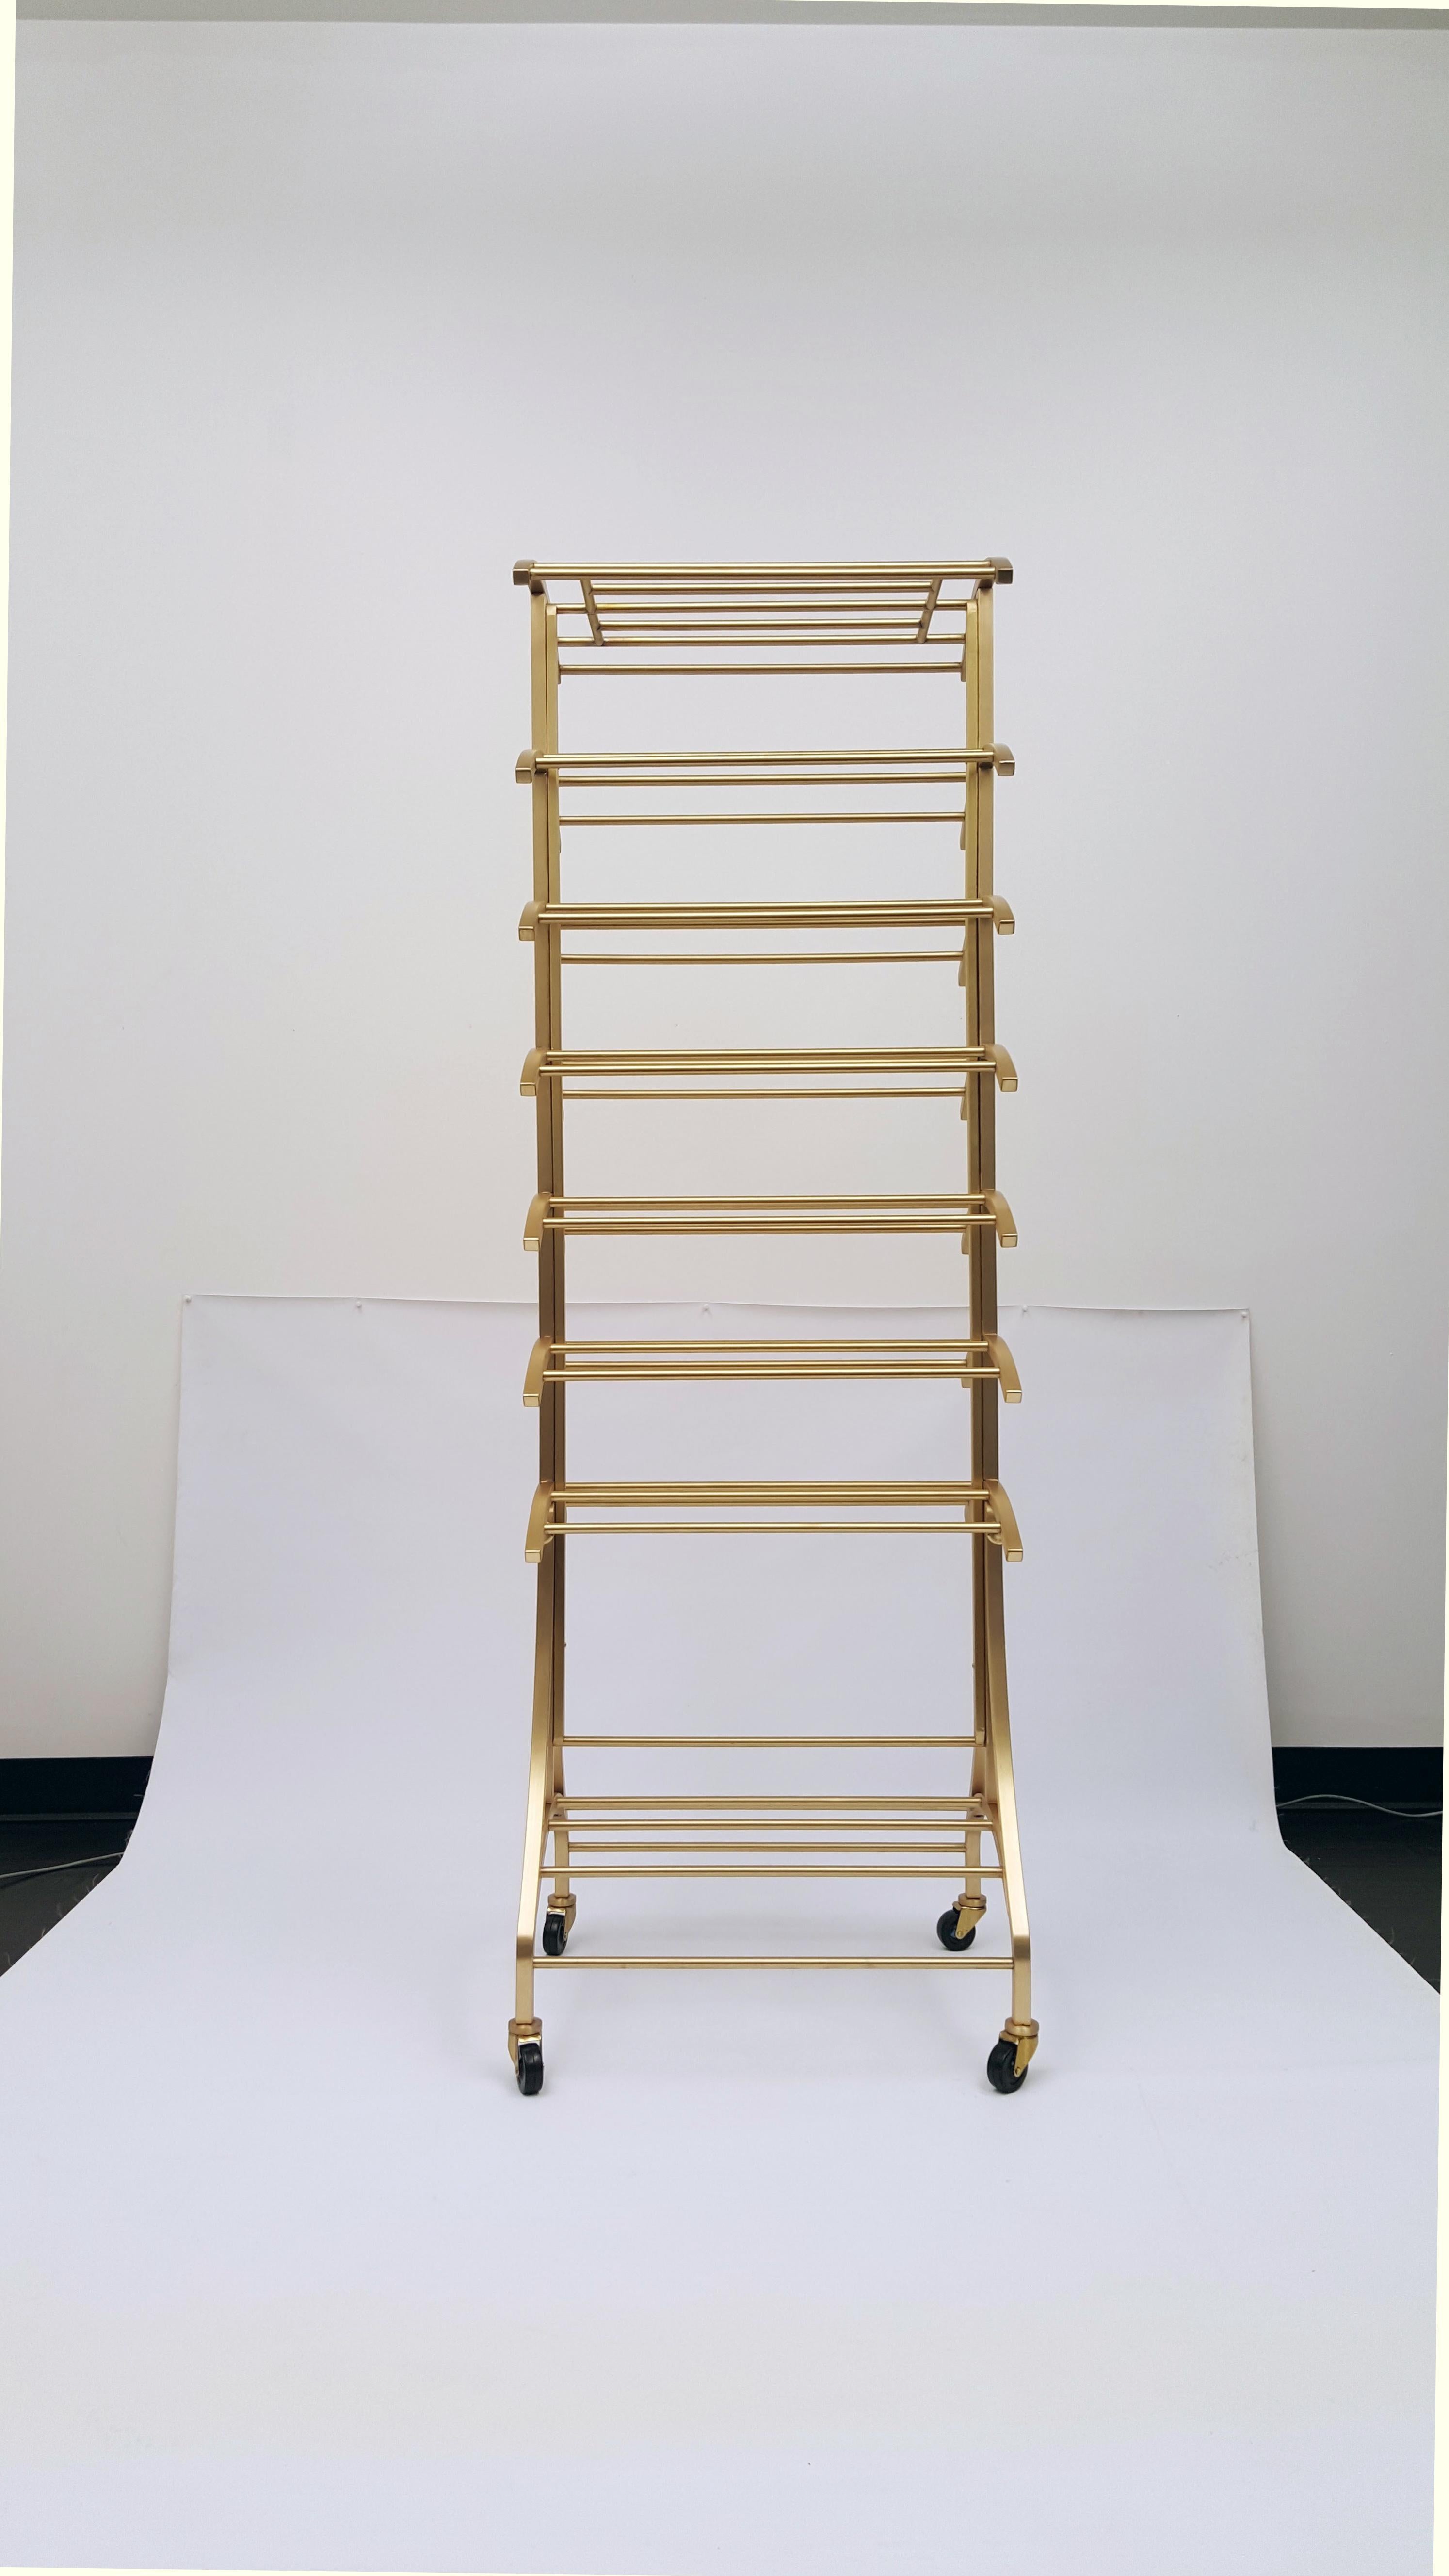 Beautifully handcrafted in our creative shop from solid architectural bronze. Removable wheels add flexibility and functionality. Aesthetically proportional curvature adds elegance to the piece.